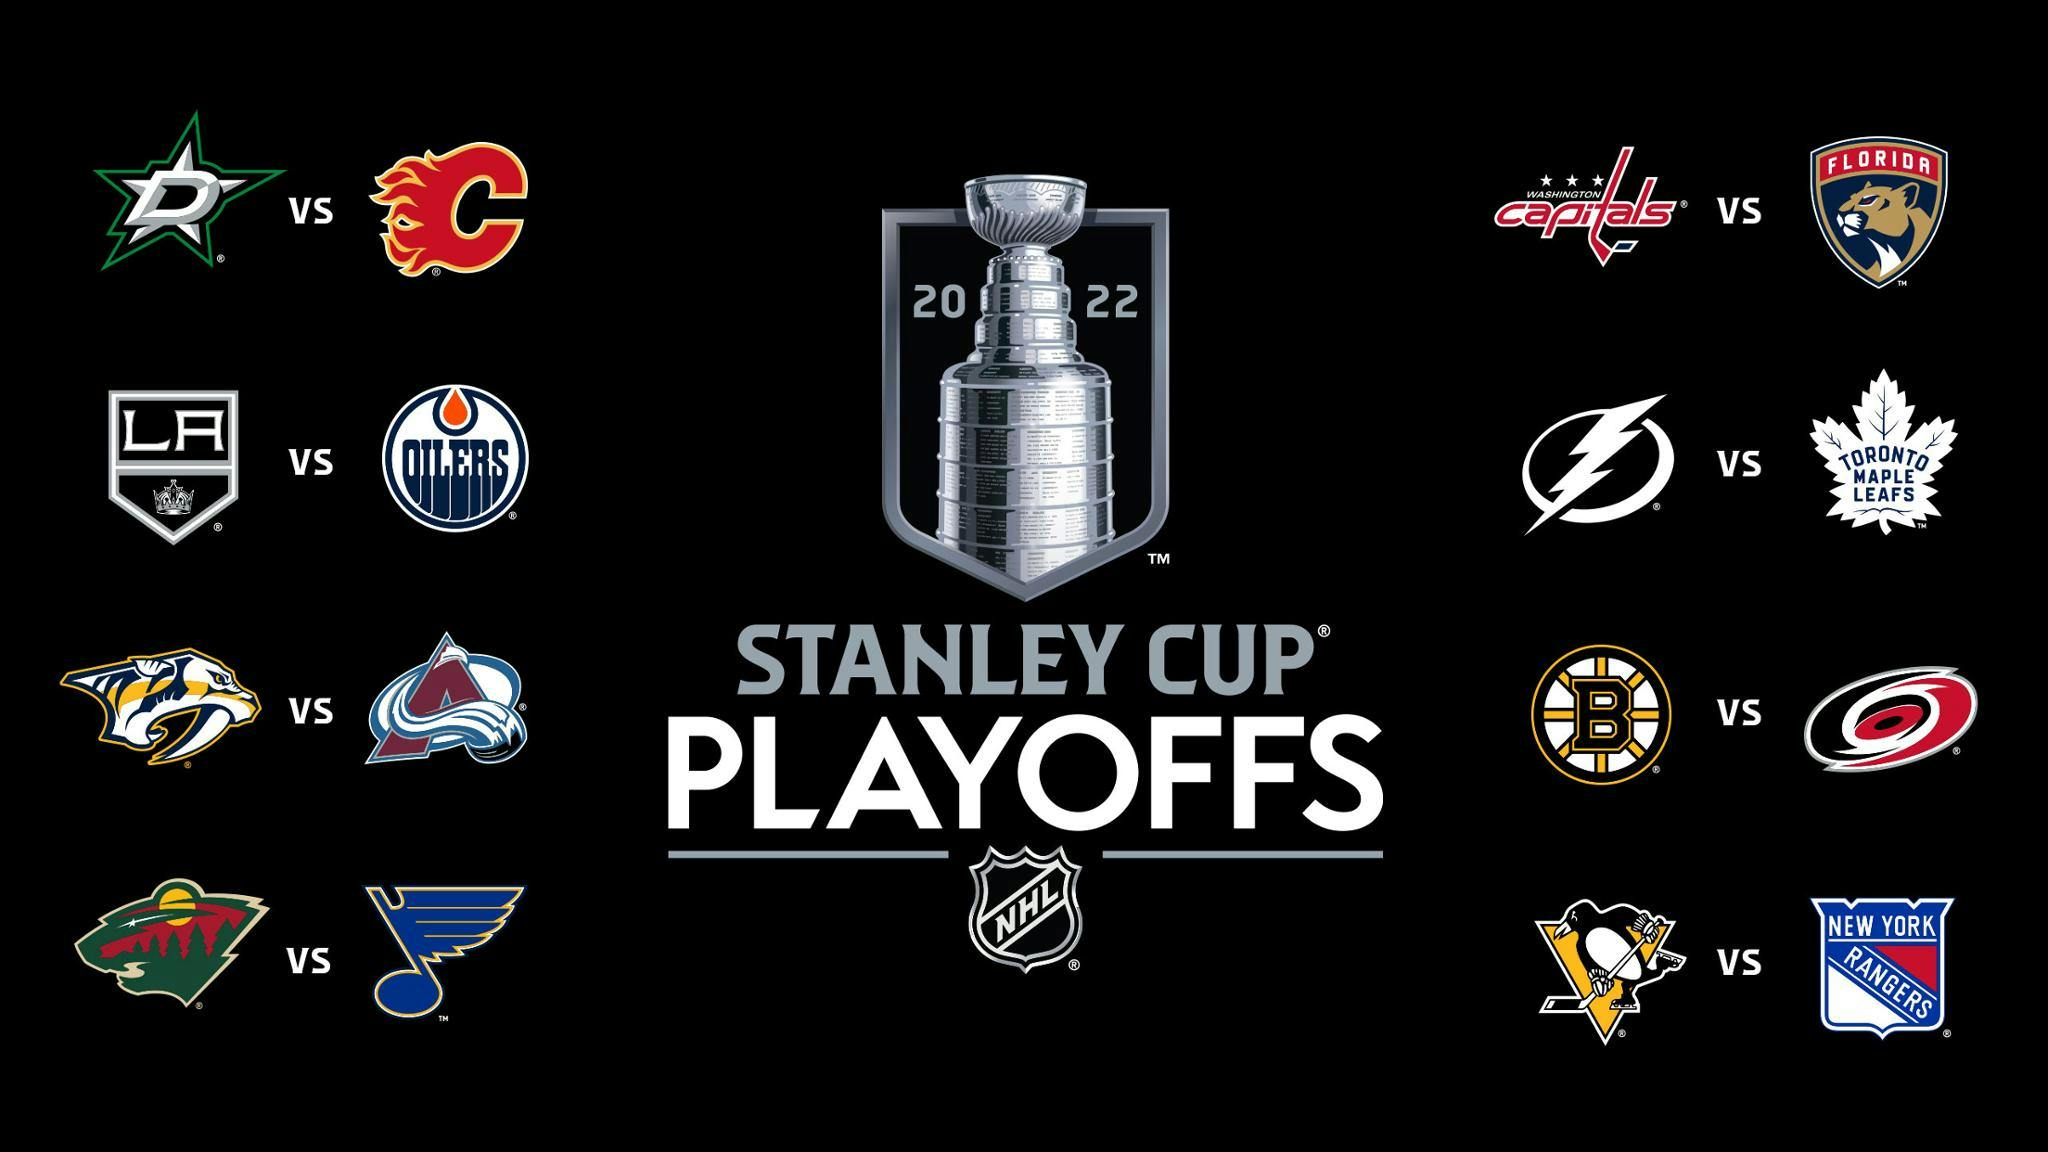 NHL playoff bracket 2022: Full schedule, TV channels, scores for